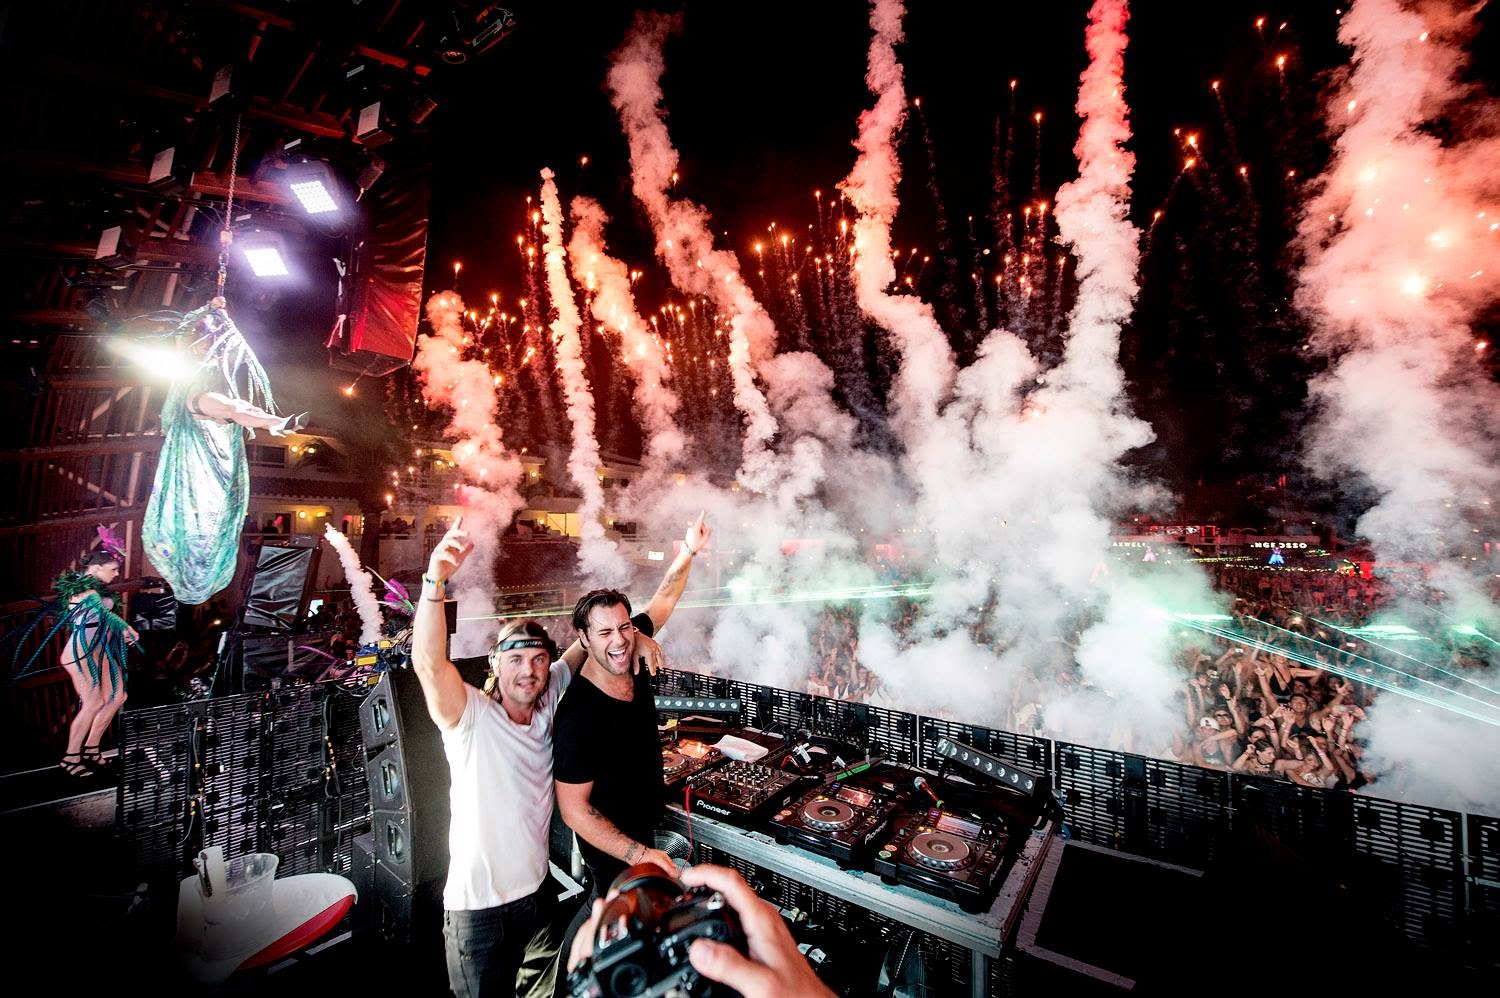 Axwell Ingrosso Video Mix Departures Closing